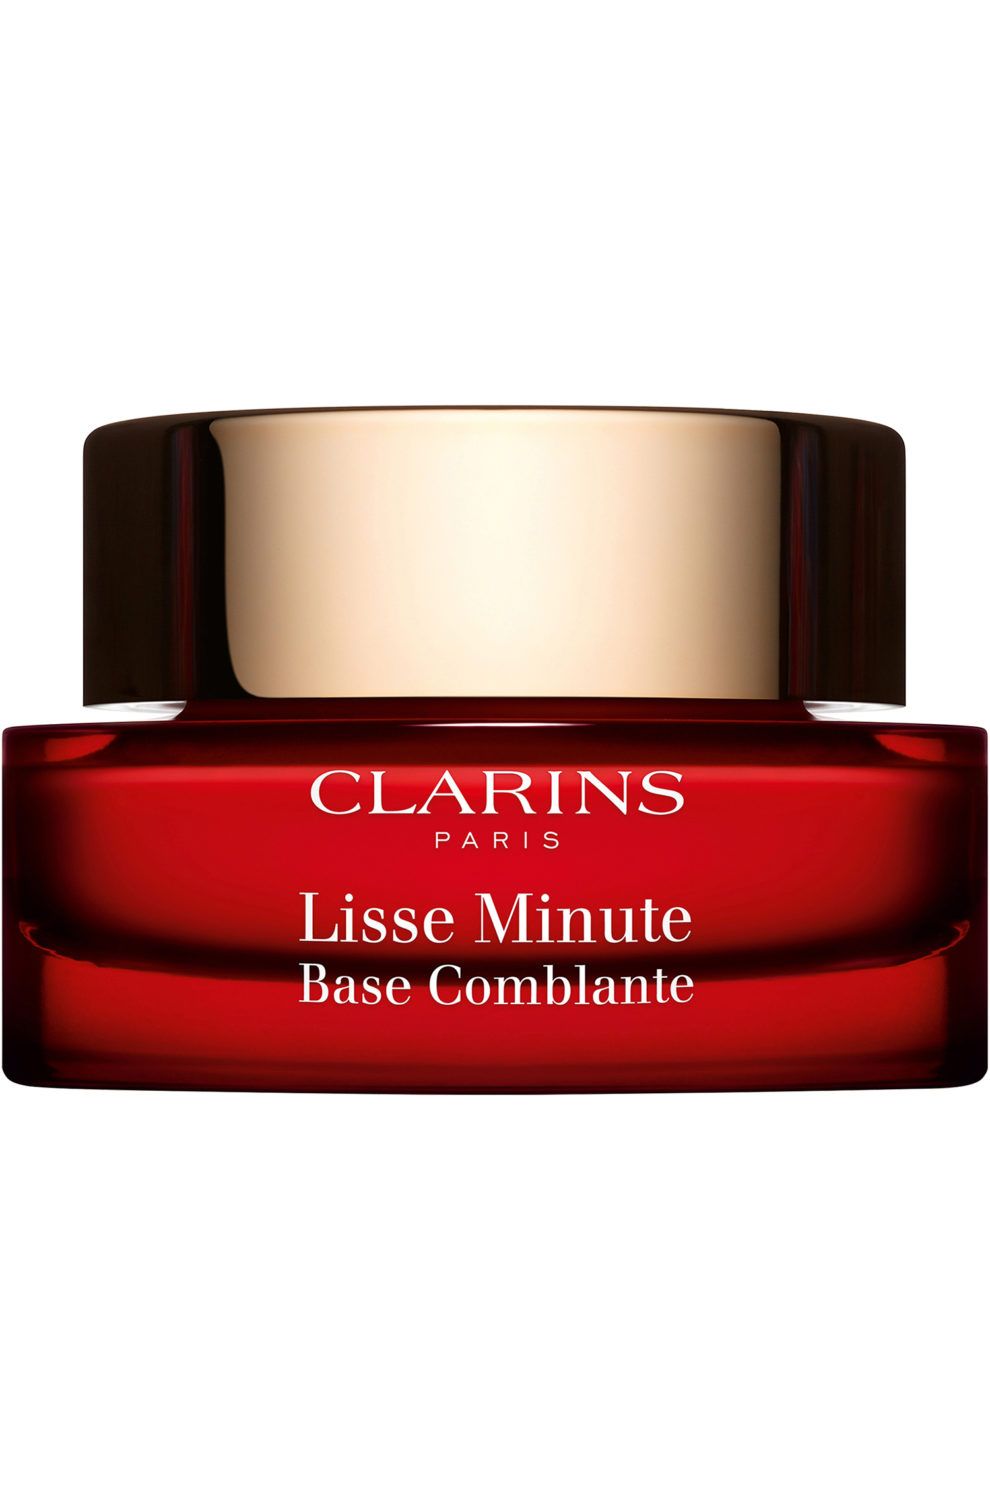 Clarins - Lisse Minute Base Comblante